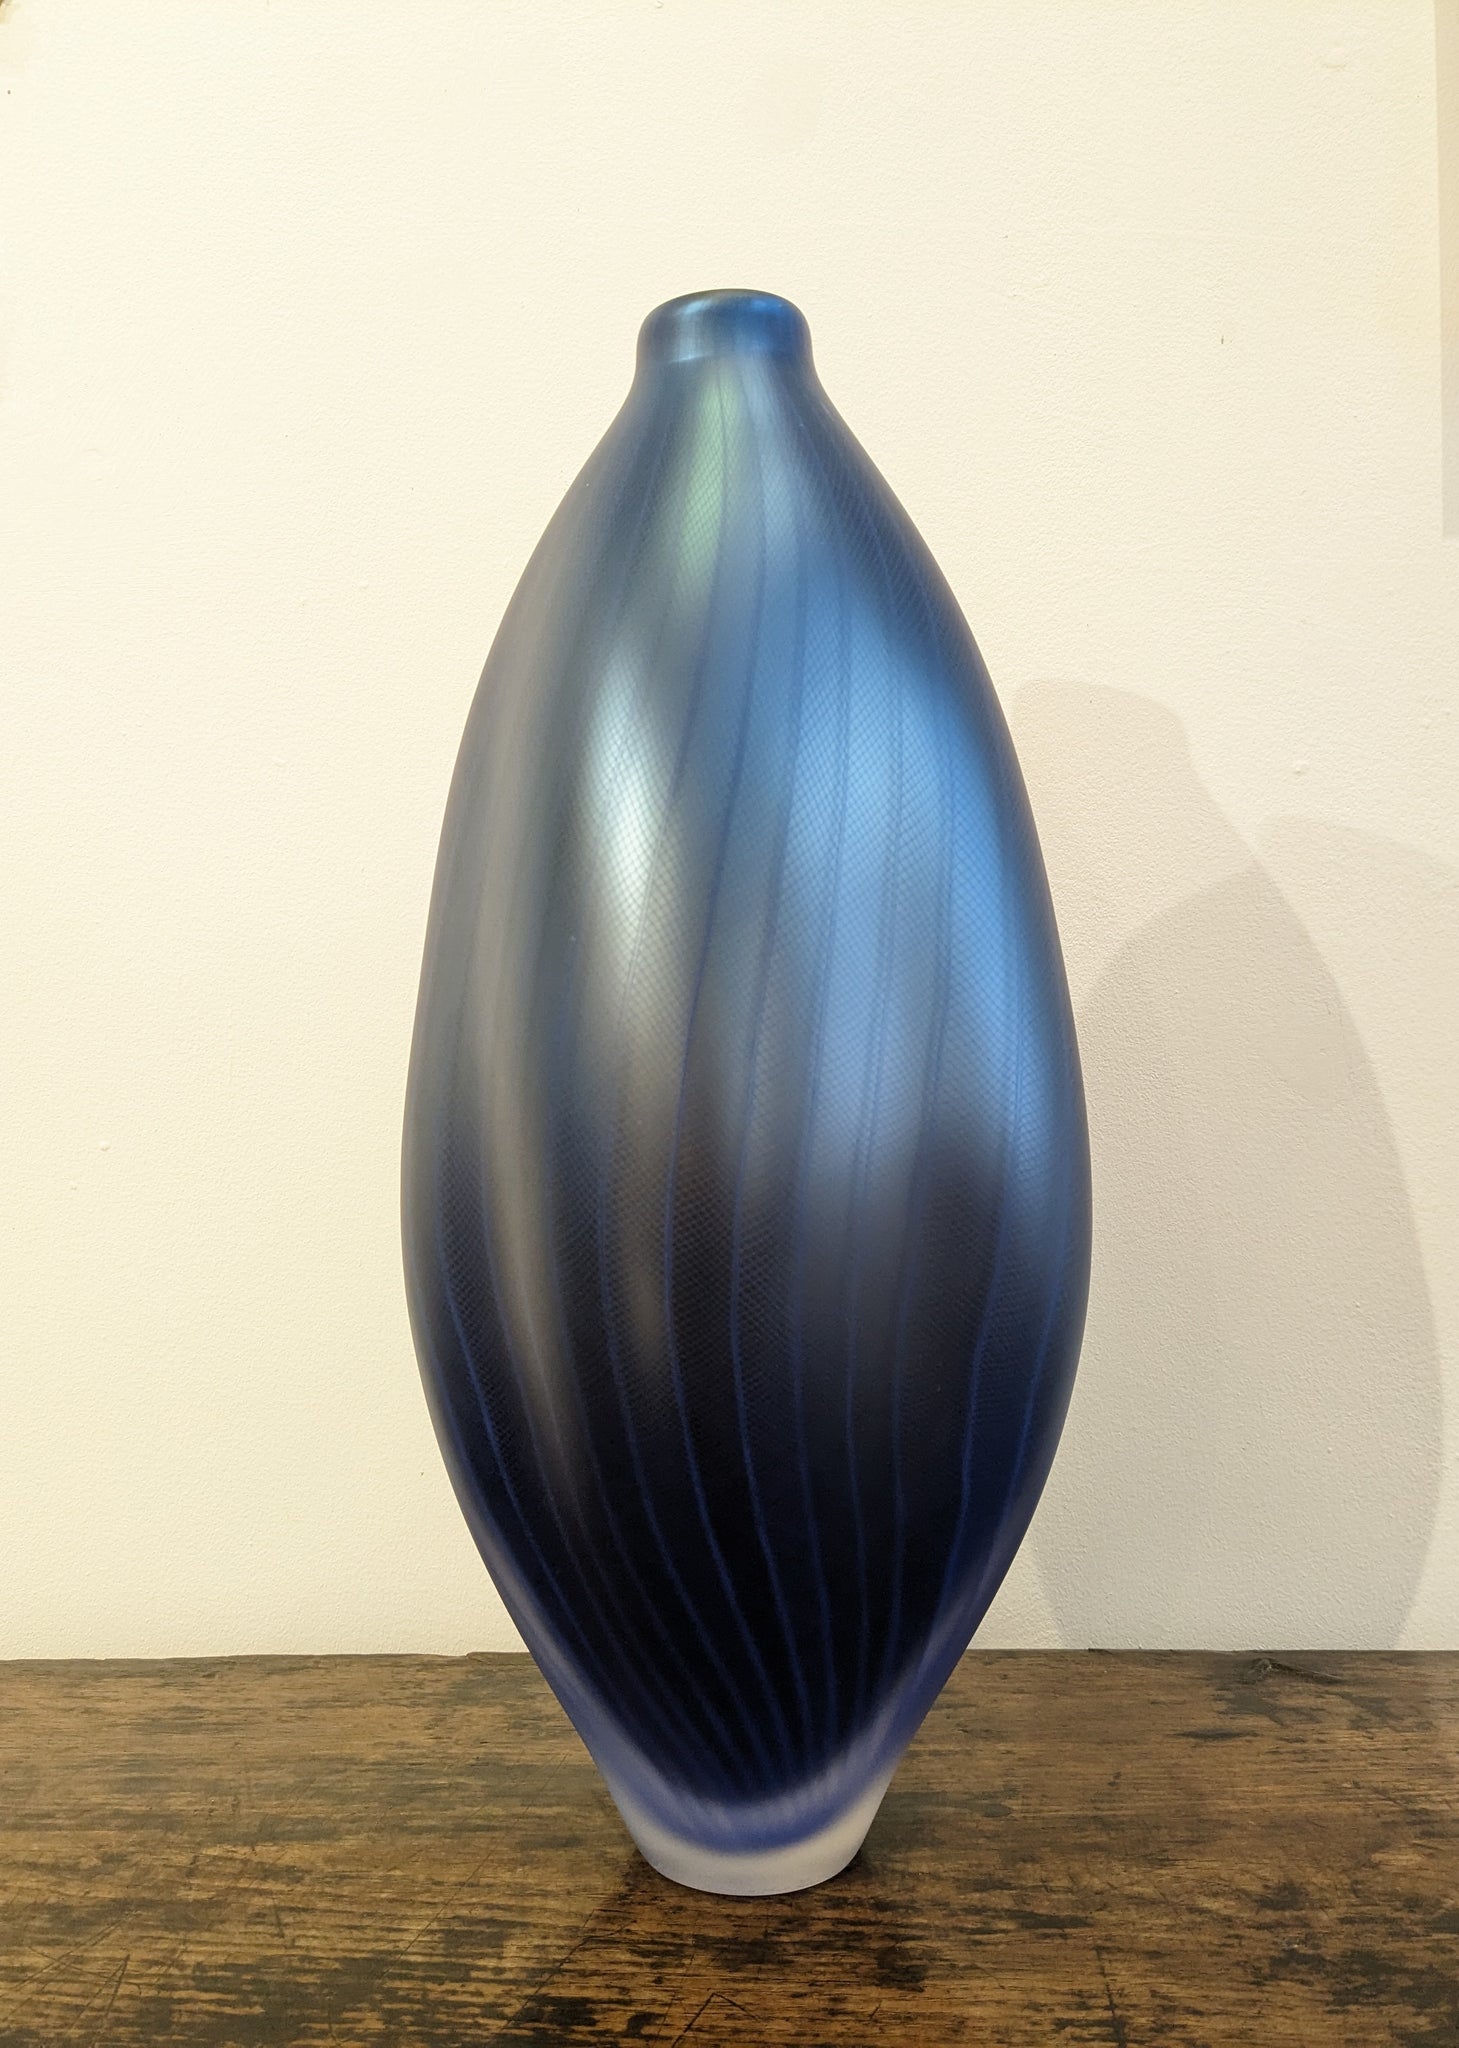 Liam Reeves - Stratiform - Gallery TEN - Contemporary Art Glass - Glass Gallery